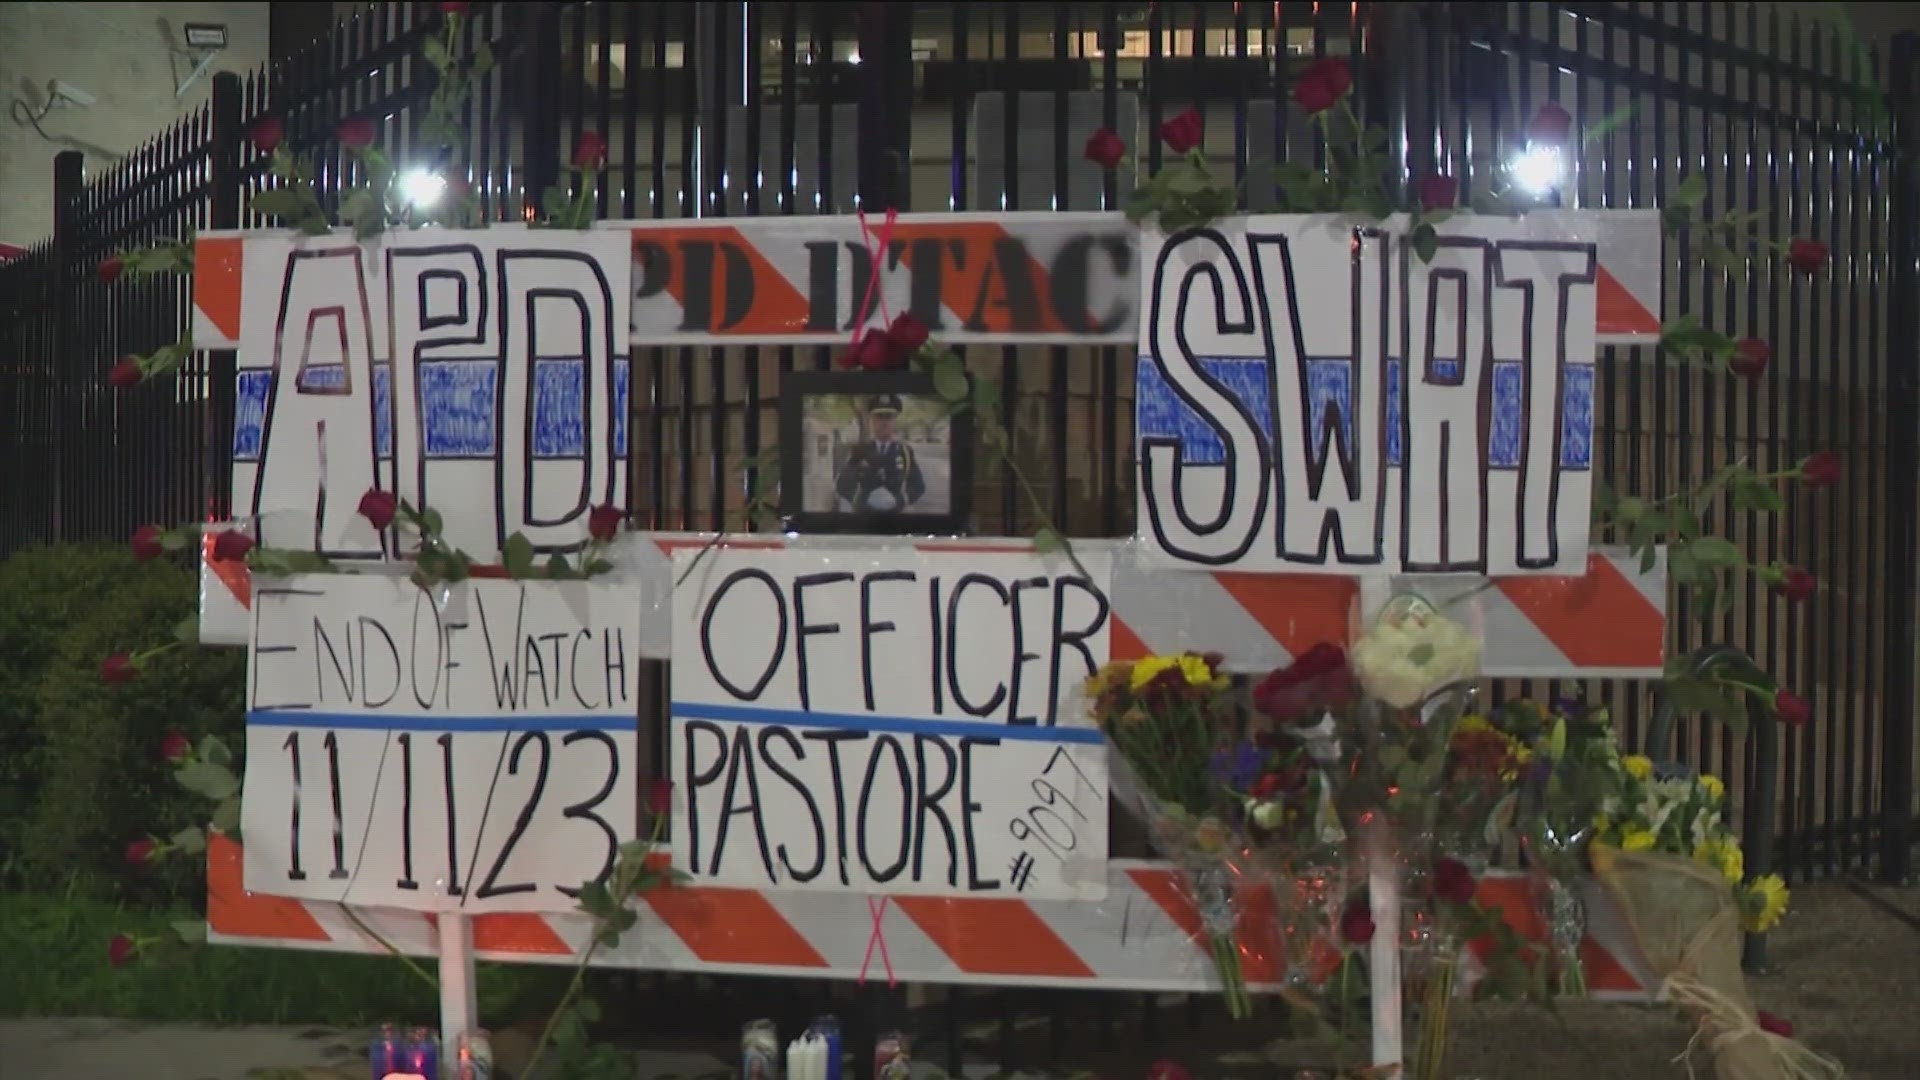 Officer Jorge Pastore was shot and killed by a stabbing suspect at a home in South Austin. KVUE's Kelsey Sanchez attended a candlelight vigil held in his honor.